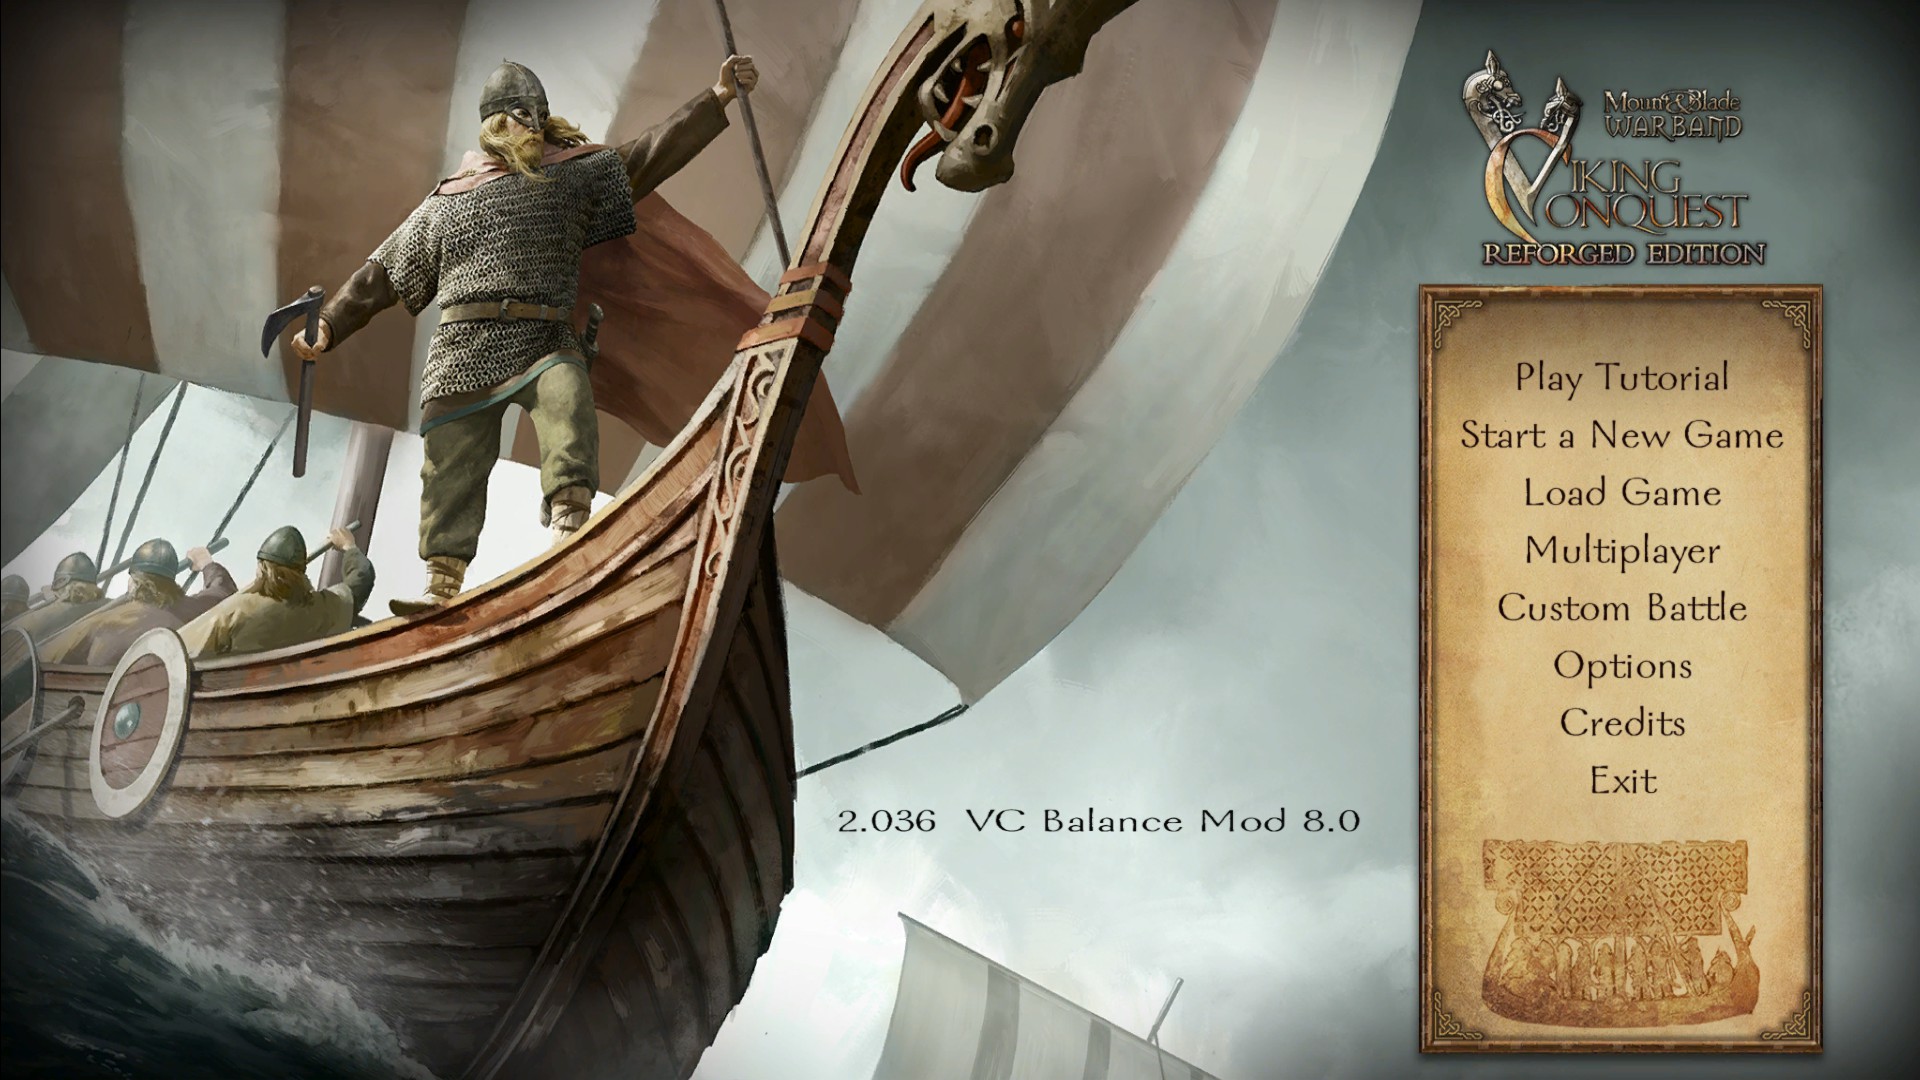 mount and blade viking conquest reputation